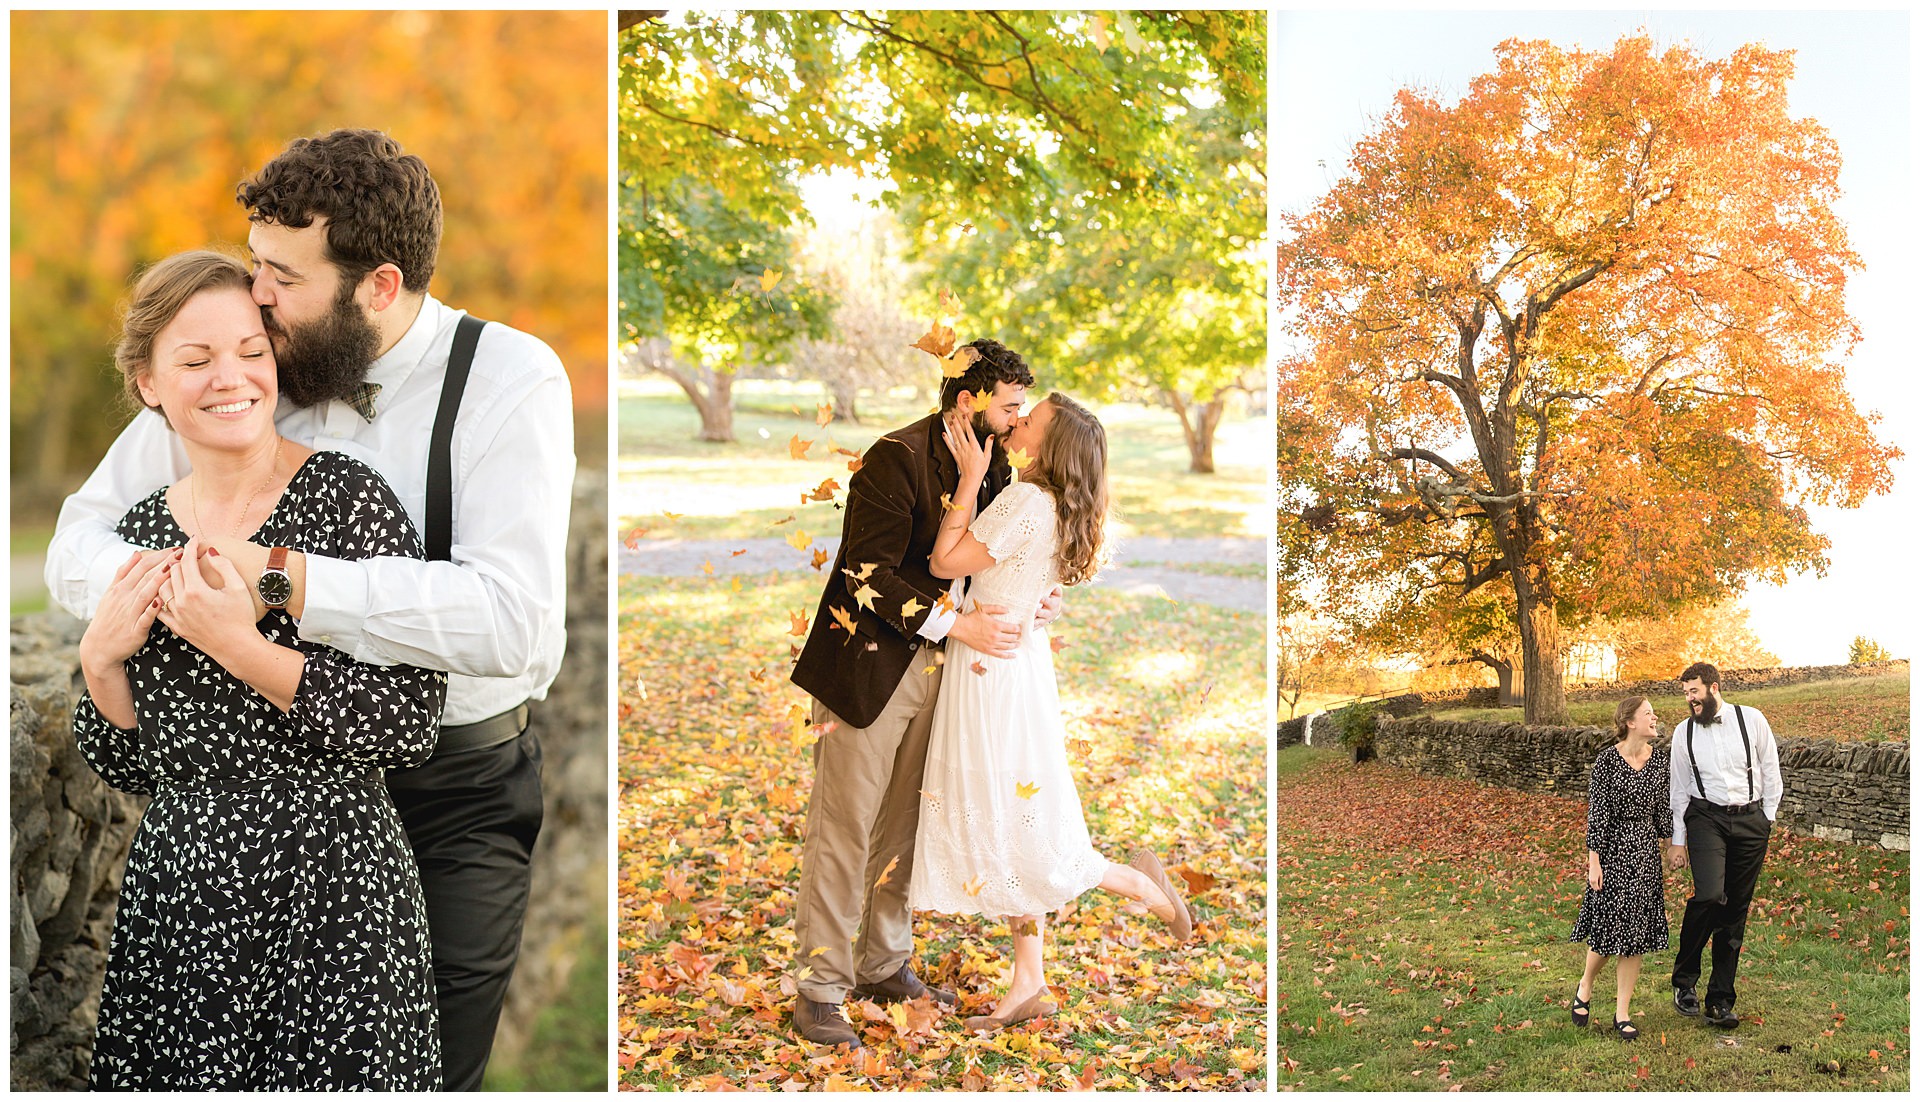 Fall Color Engagement Session at Shaker Village